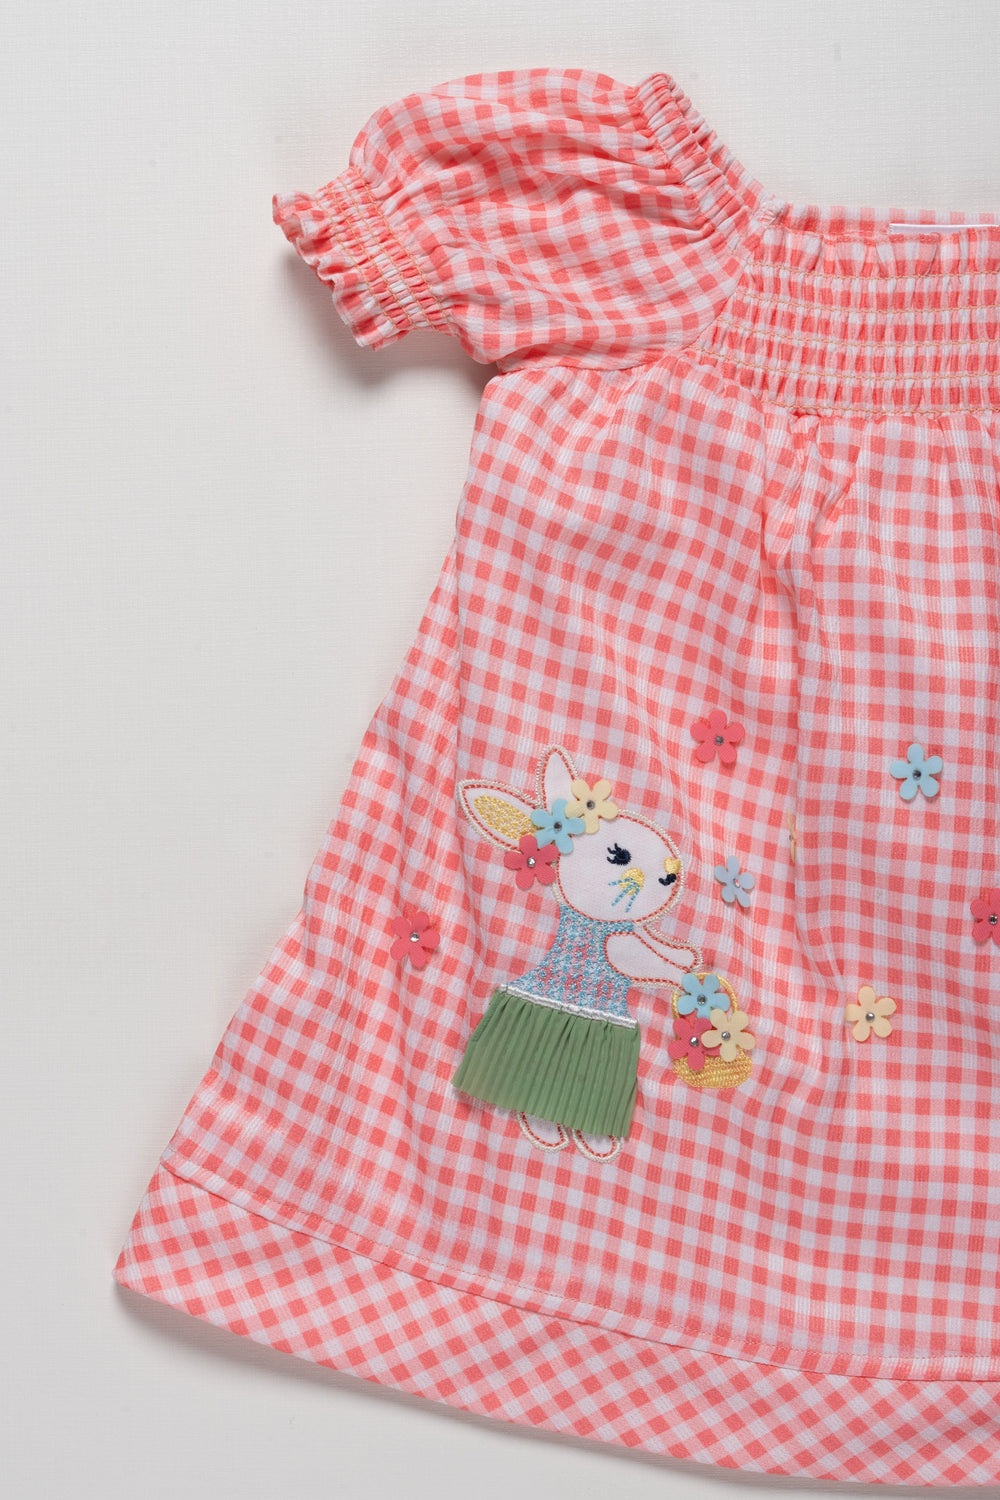 The Nesavu Girls Cotton Frock Adorable Girls Checkered Cotton Frock with Bunny Embroidery Nesavu Adorable Girls Checkered Cotton Frock with Bunny Embroidery | The Nesavu